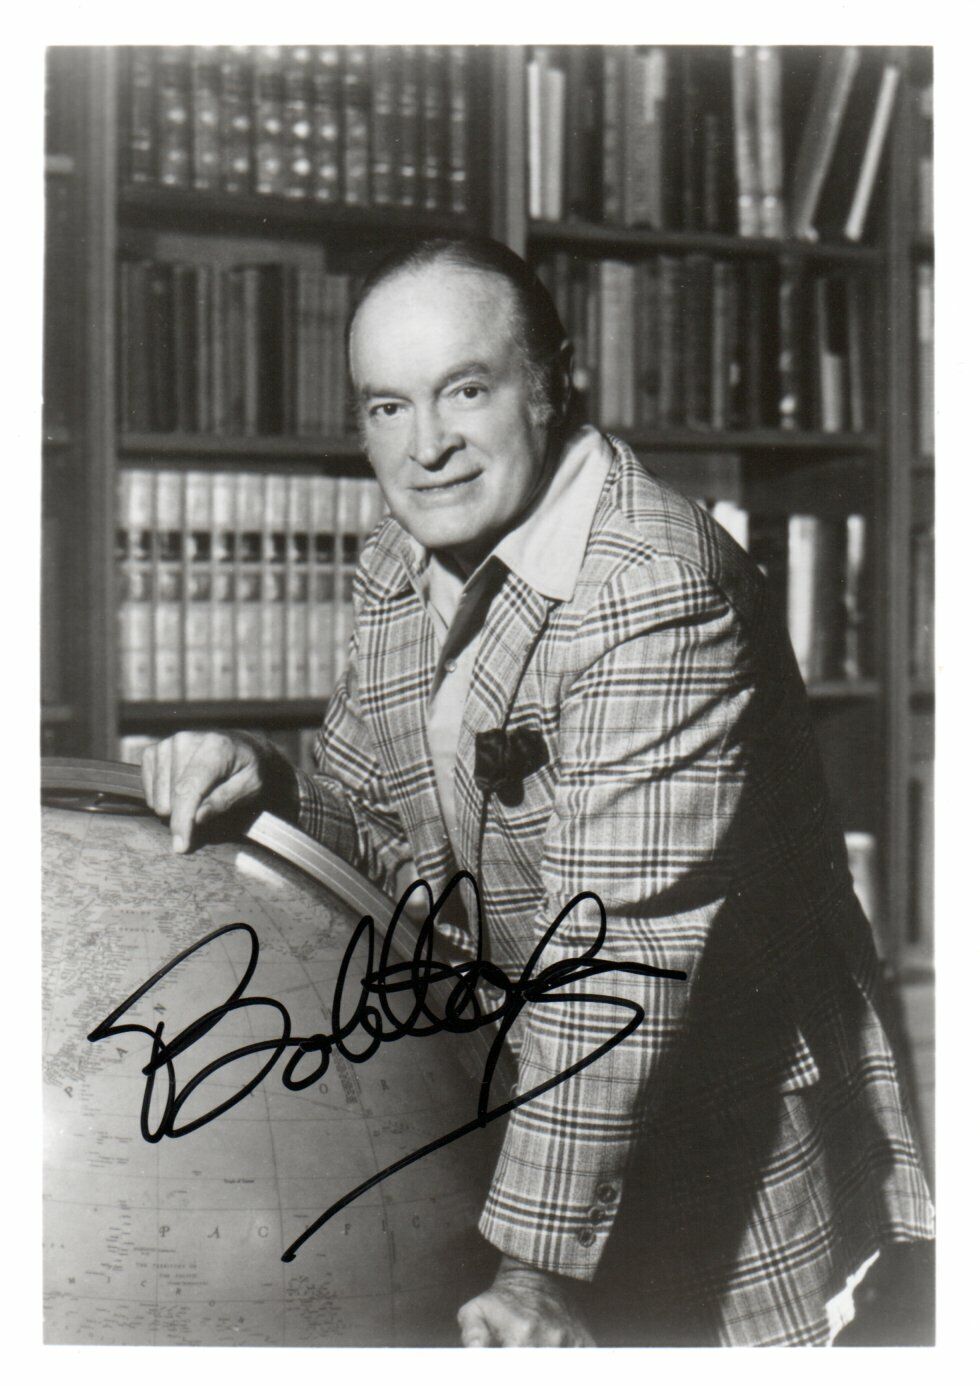 BOB HOPE LOVELY HAND SIGNED Photo Poster painting 7X5 HOLLYWOOD COMEDY FILM ACTOR ROAD FILMS